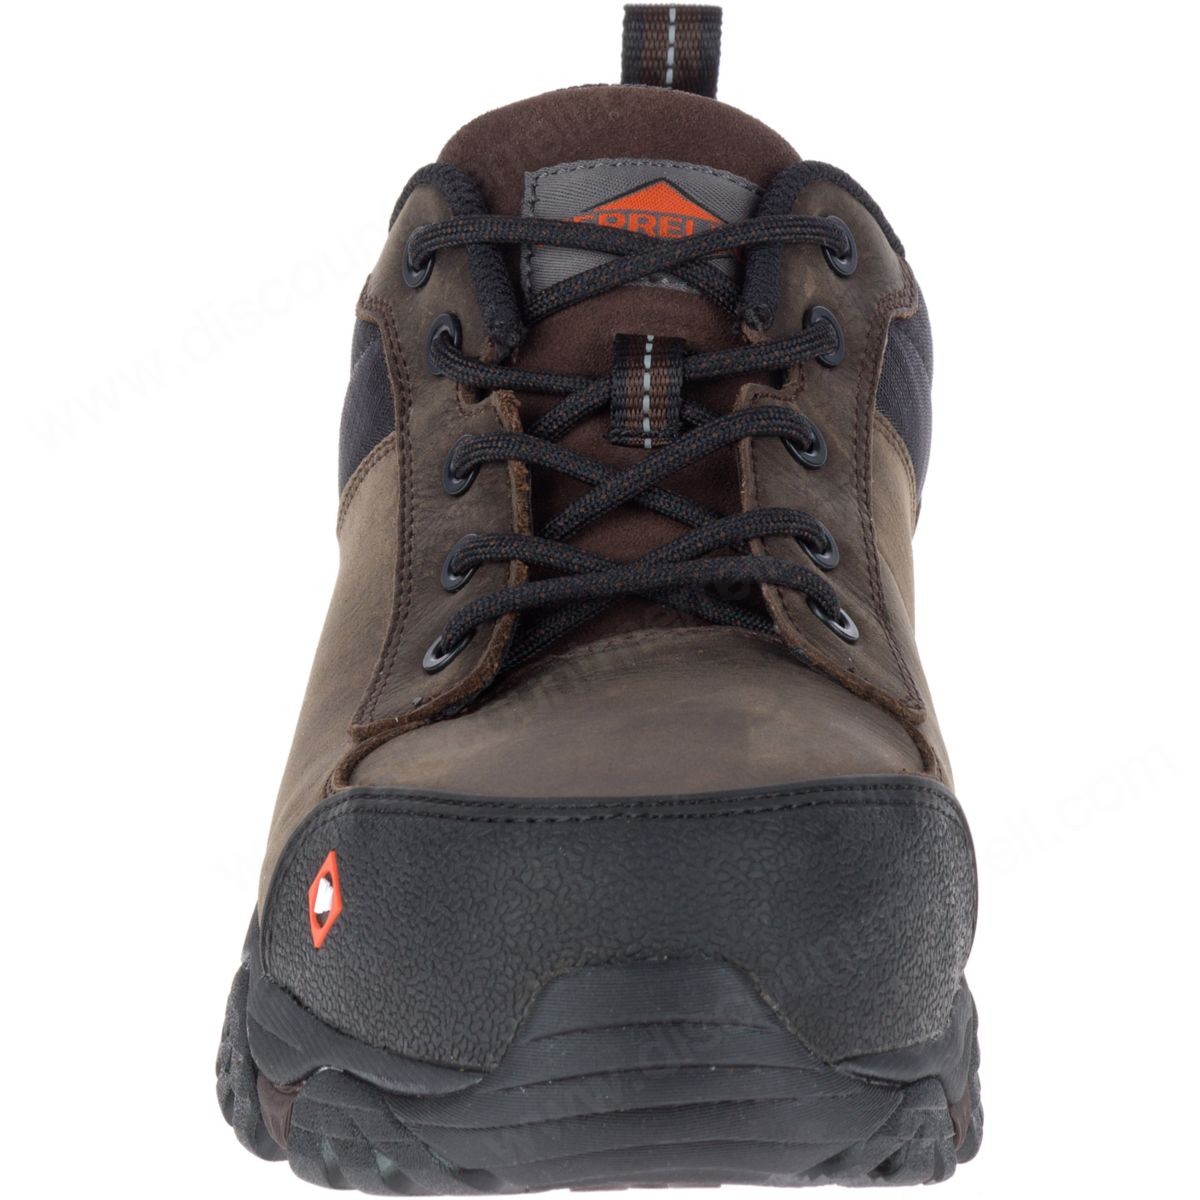 Merrell Mens's Moab Rover Lace Comp Toe 